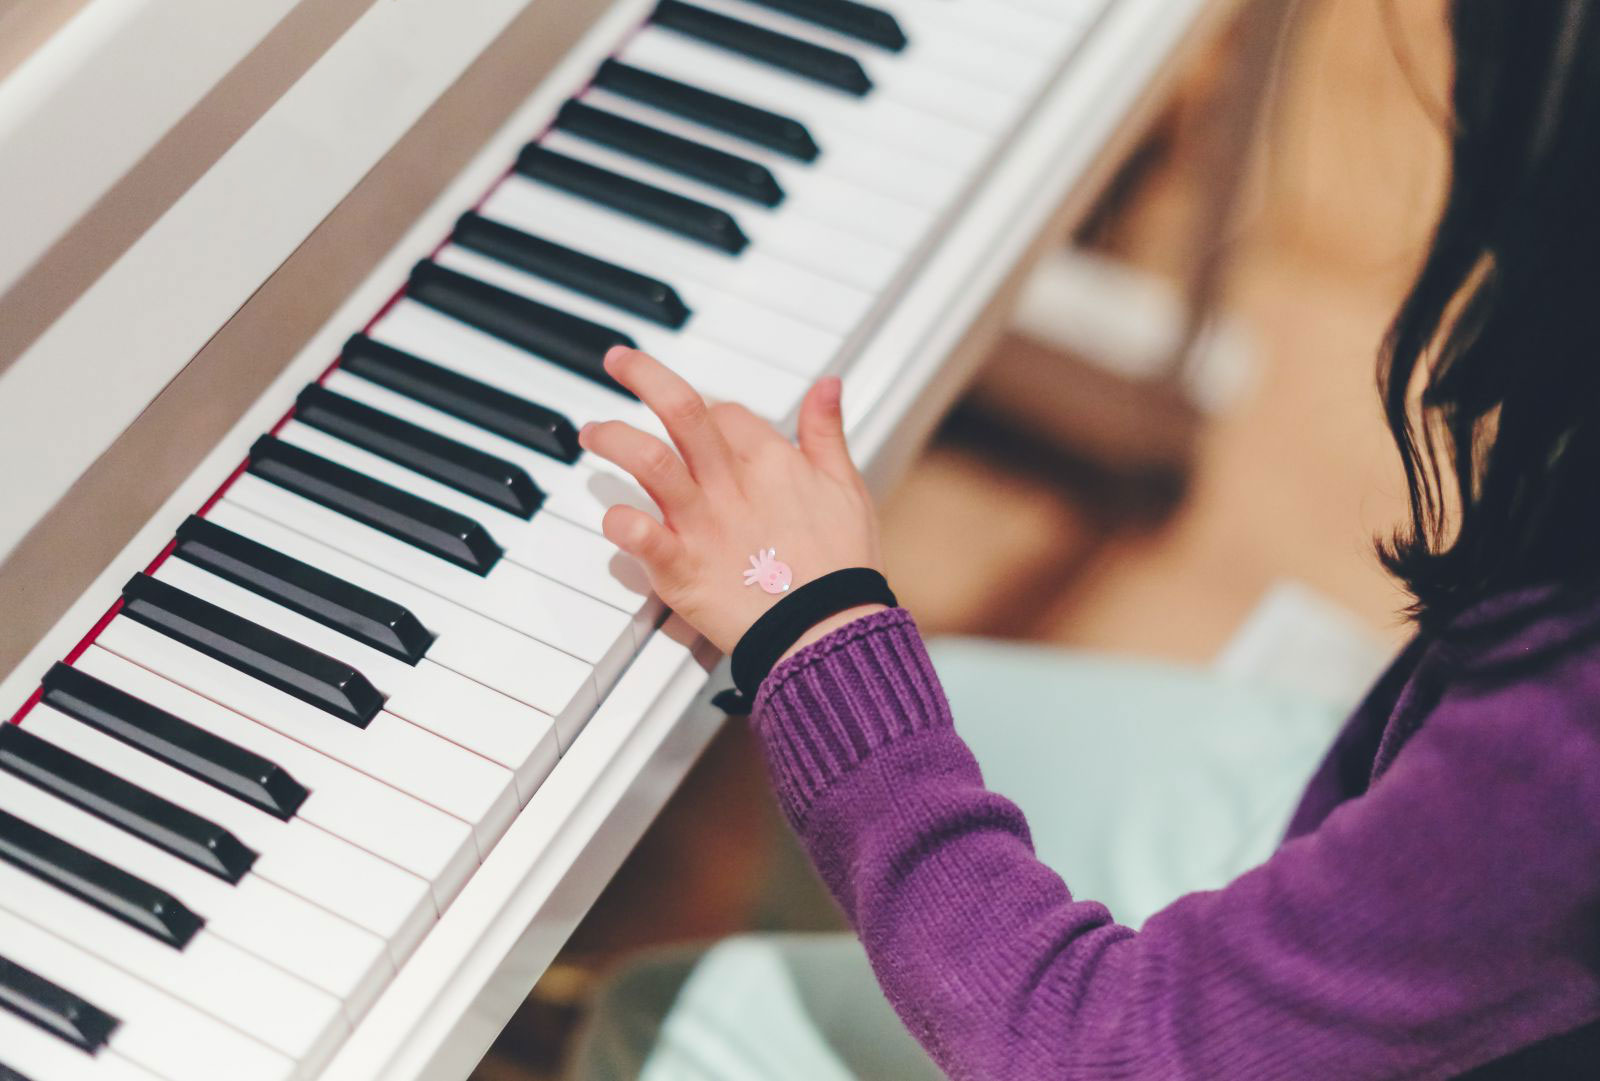 I’m left-handed – Can I play the piano?